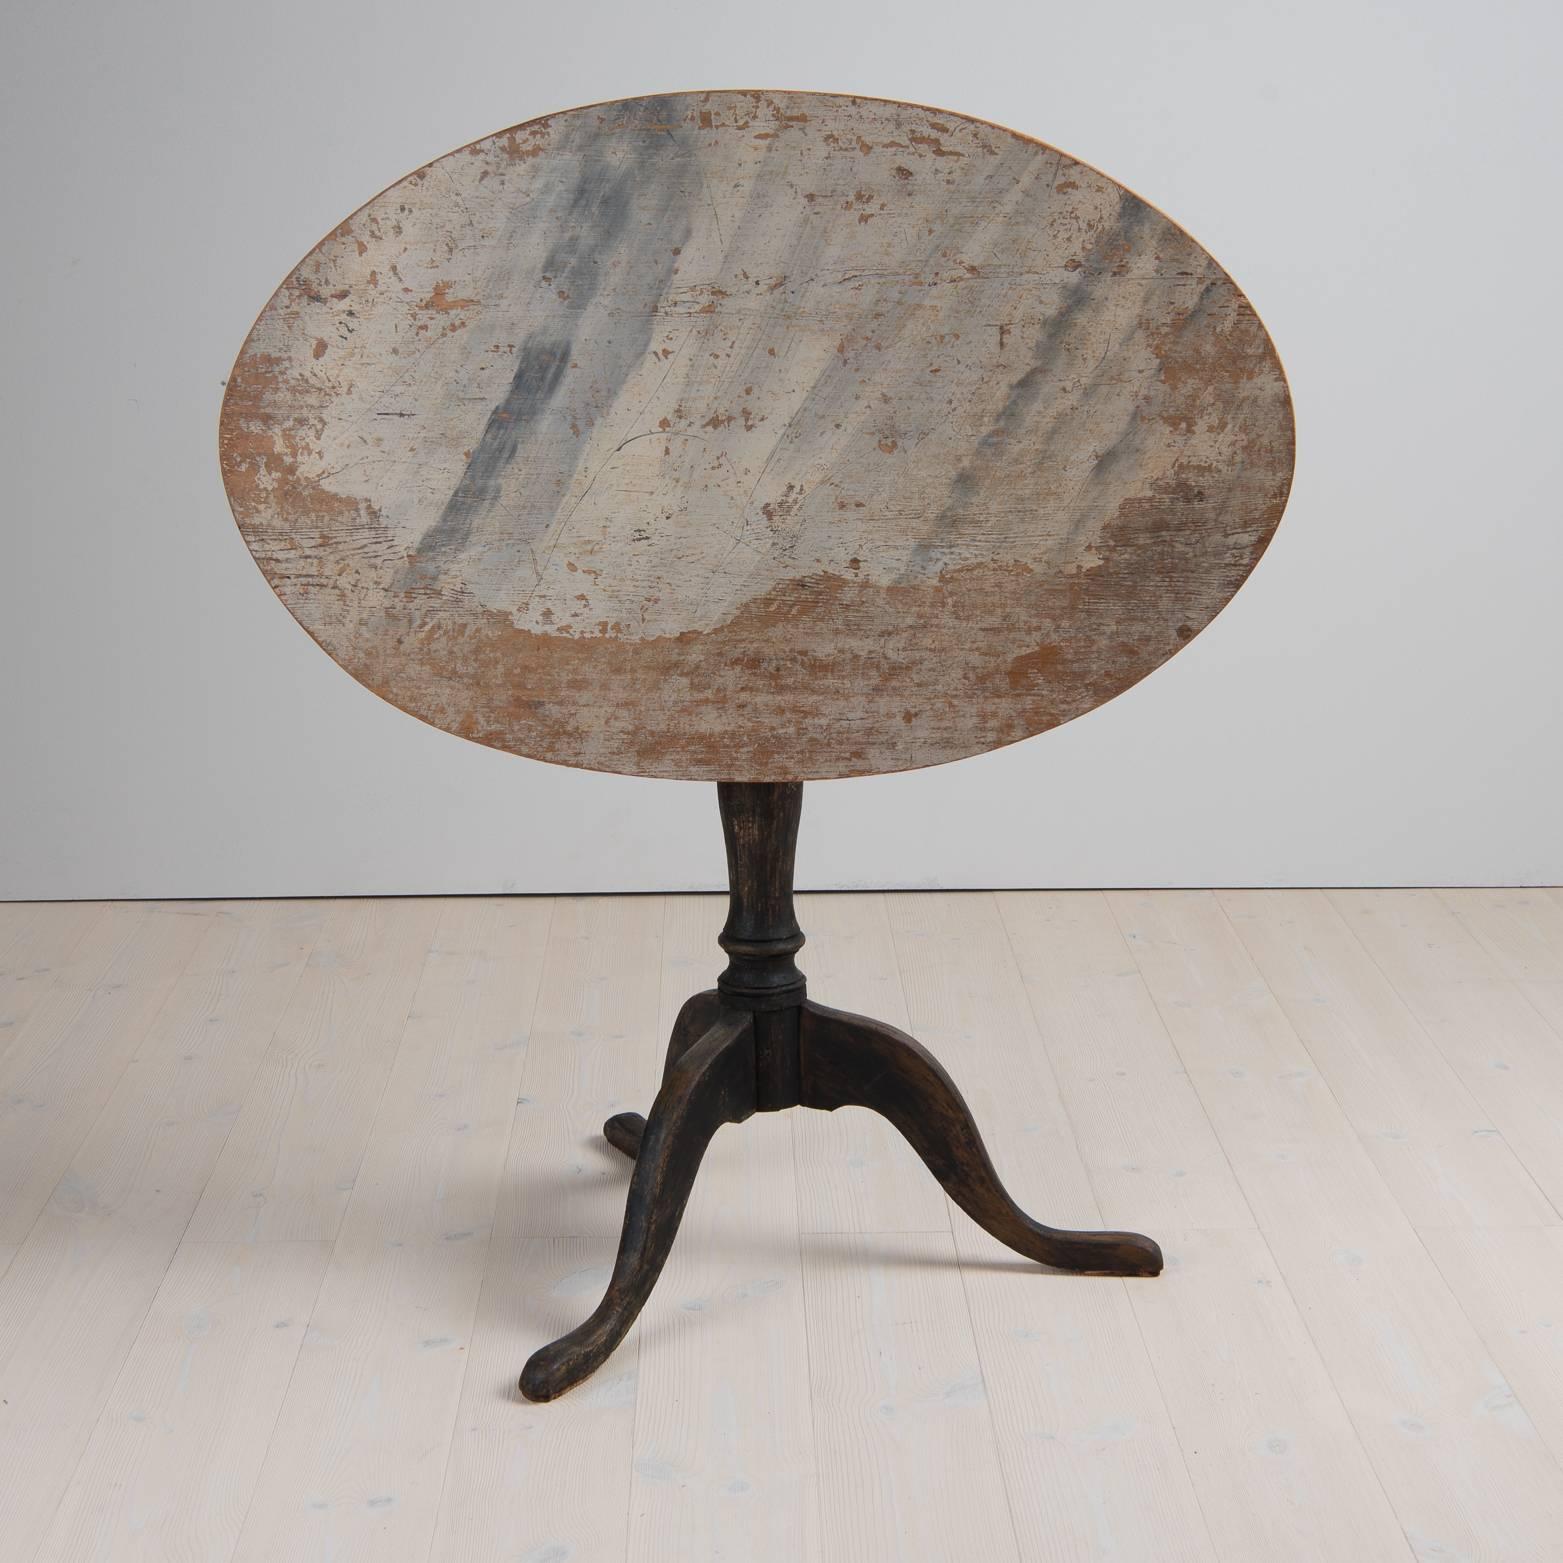 Swedish Rococo tilt-top table from Northern Sweden. Oval top with a turned base standing on a tripod foot. The table is dry scraped to original paint. No touch ups.